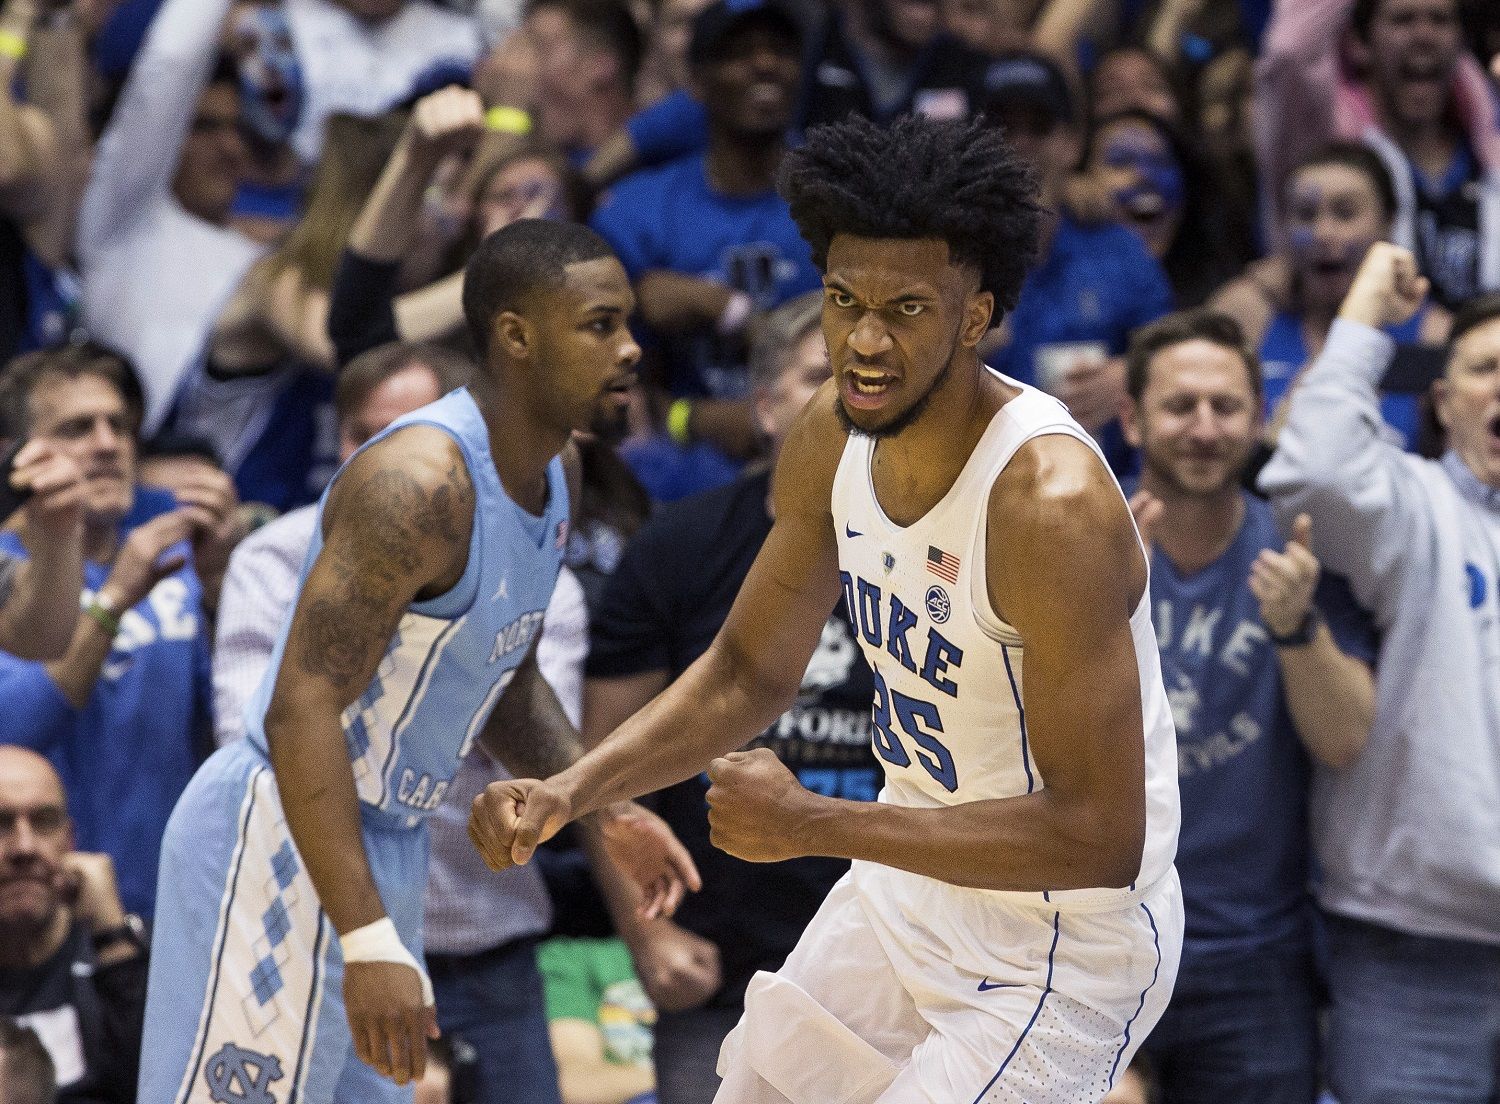 Duke's Marvin Bagley III (35) celebrates after a dunk during the second half of an NCAA college basketball game against North Carolina in Durham, N.C., Saturday, March 3, 2018. Duke won 74-64. (AP Photo/Ben McKeown)